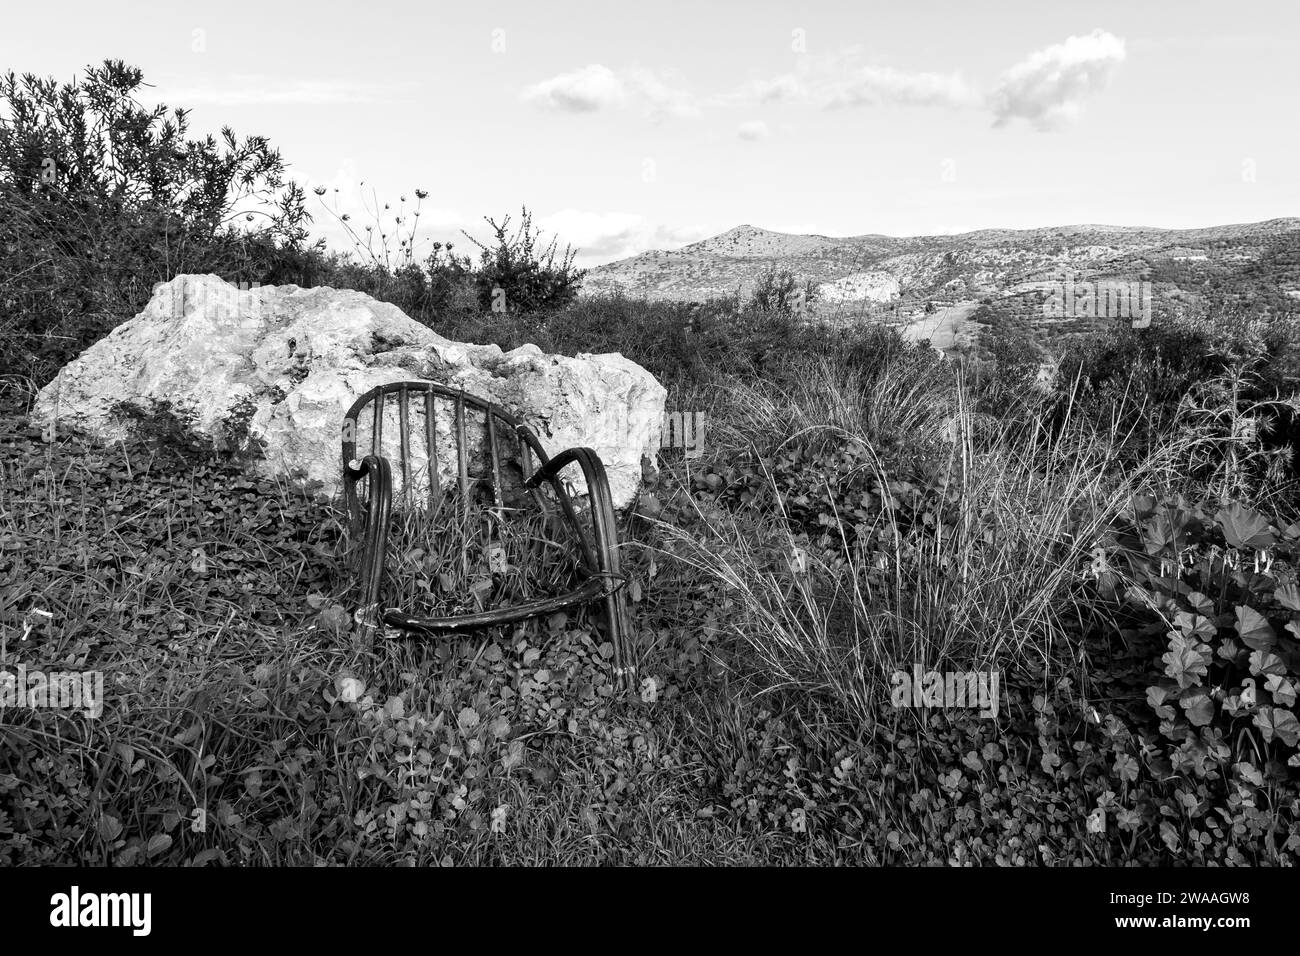 Abandoned chair.. Stock Photo